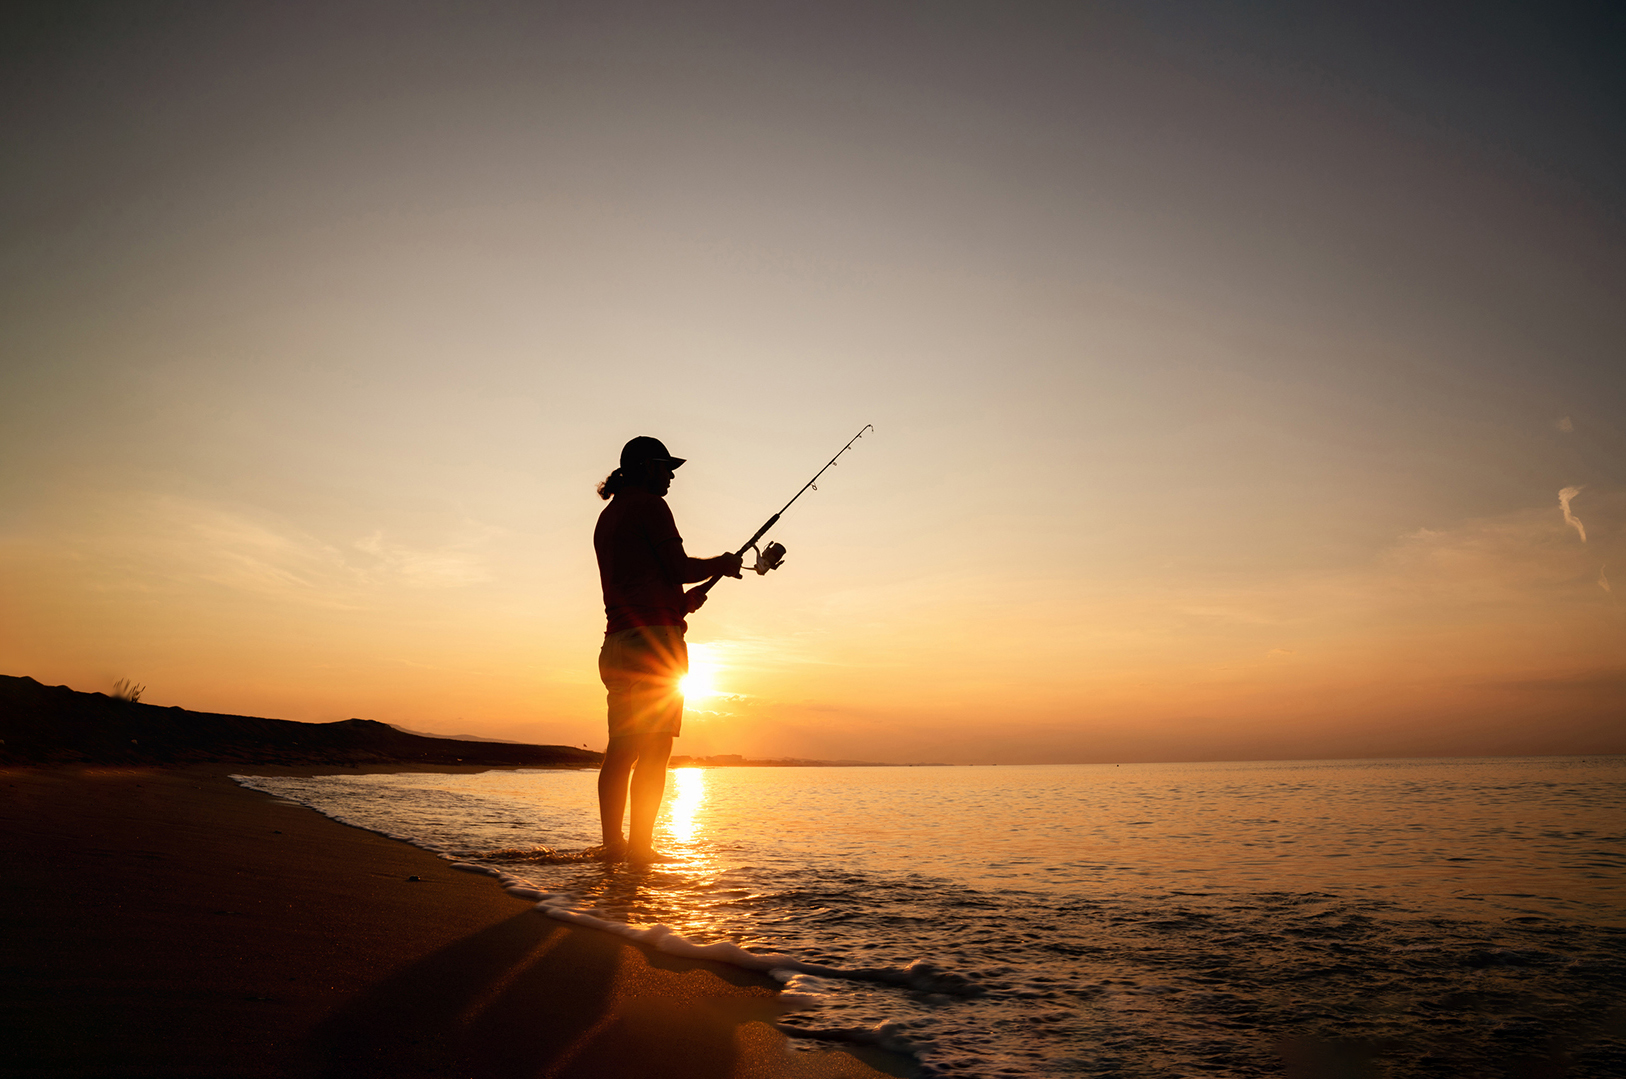 Fishing during sunrise on the beach.